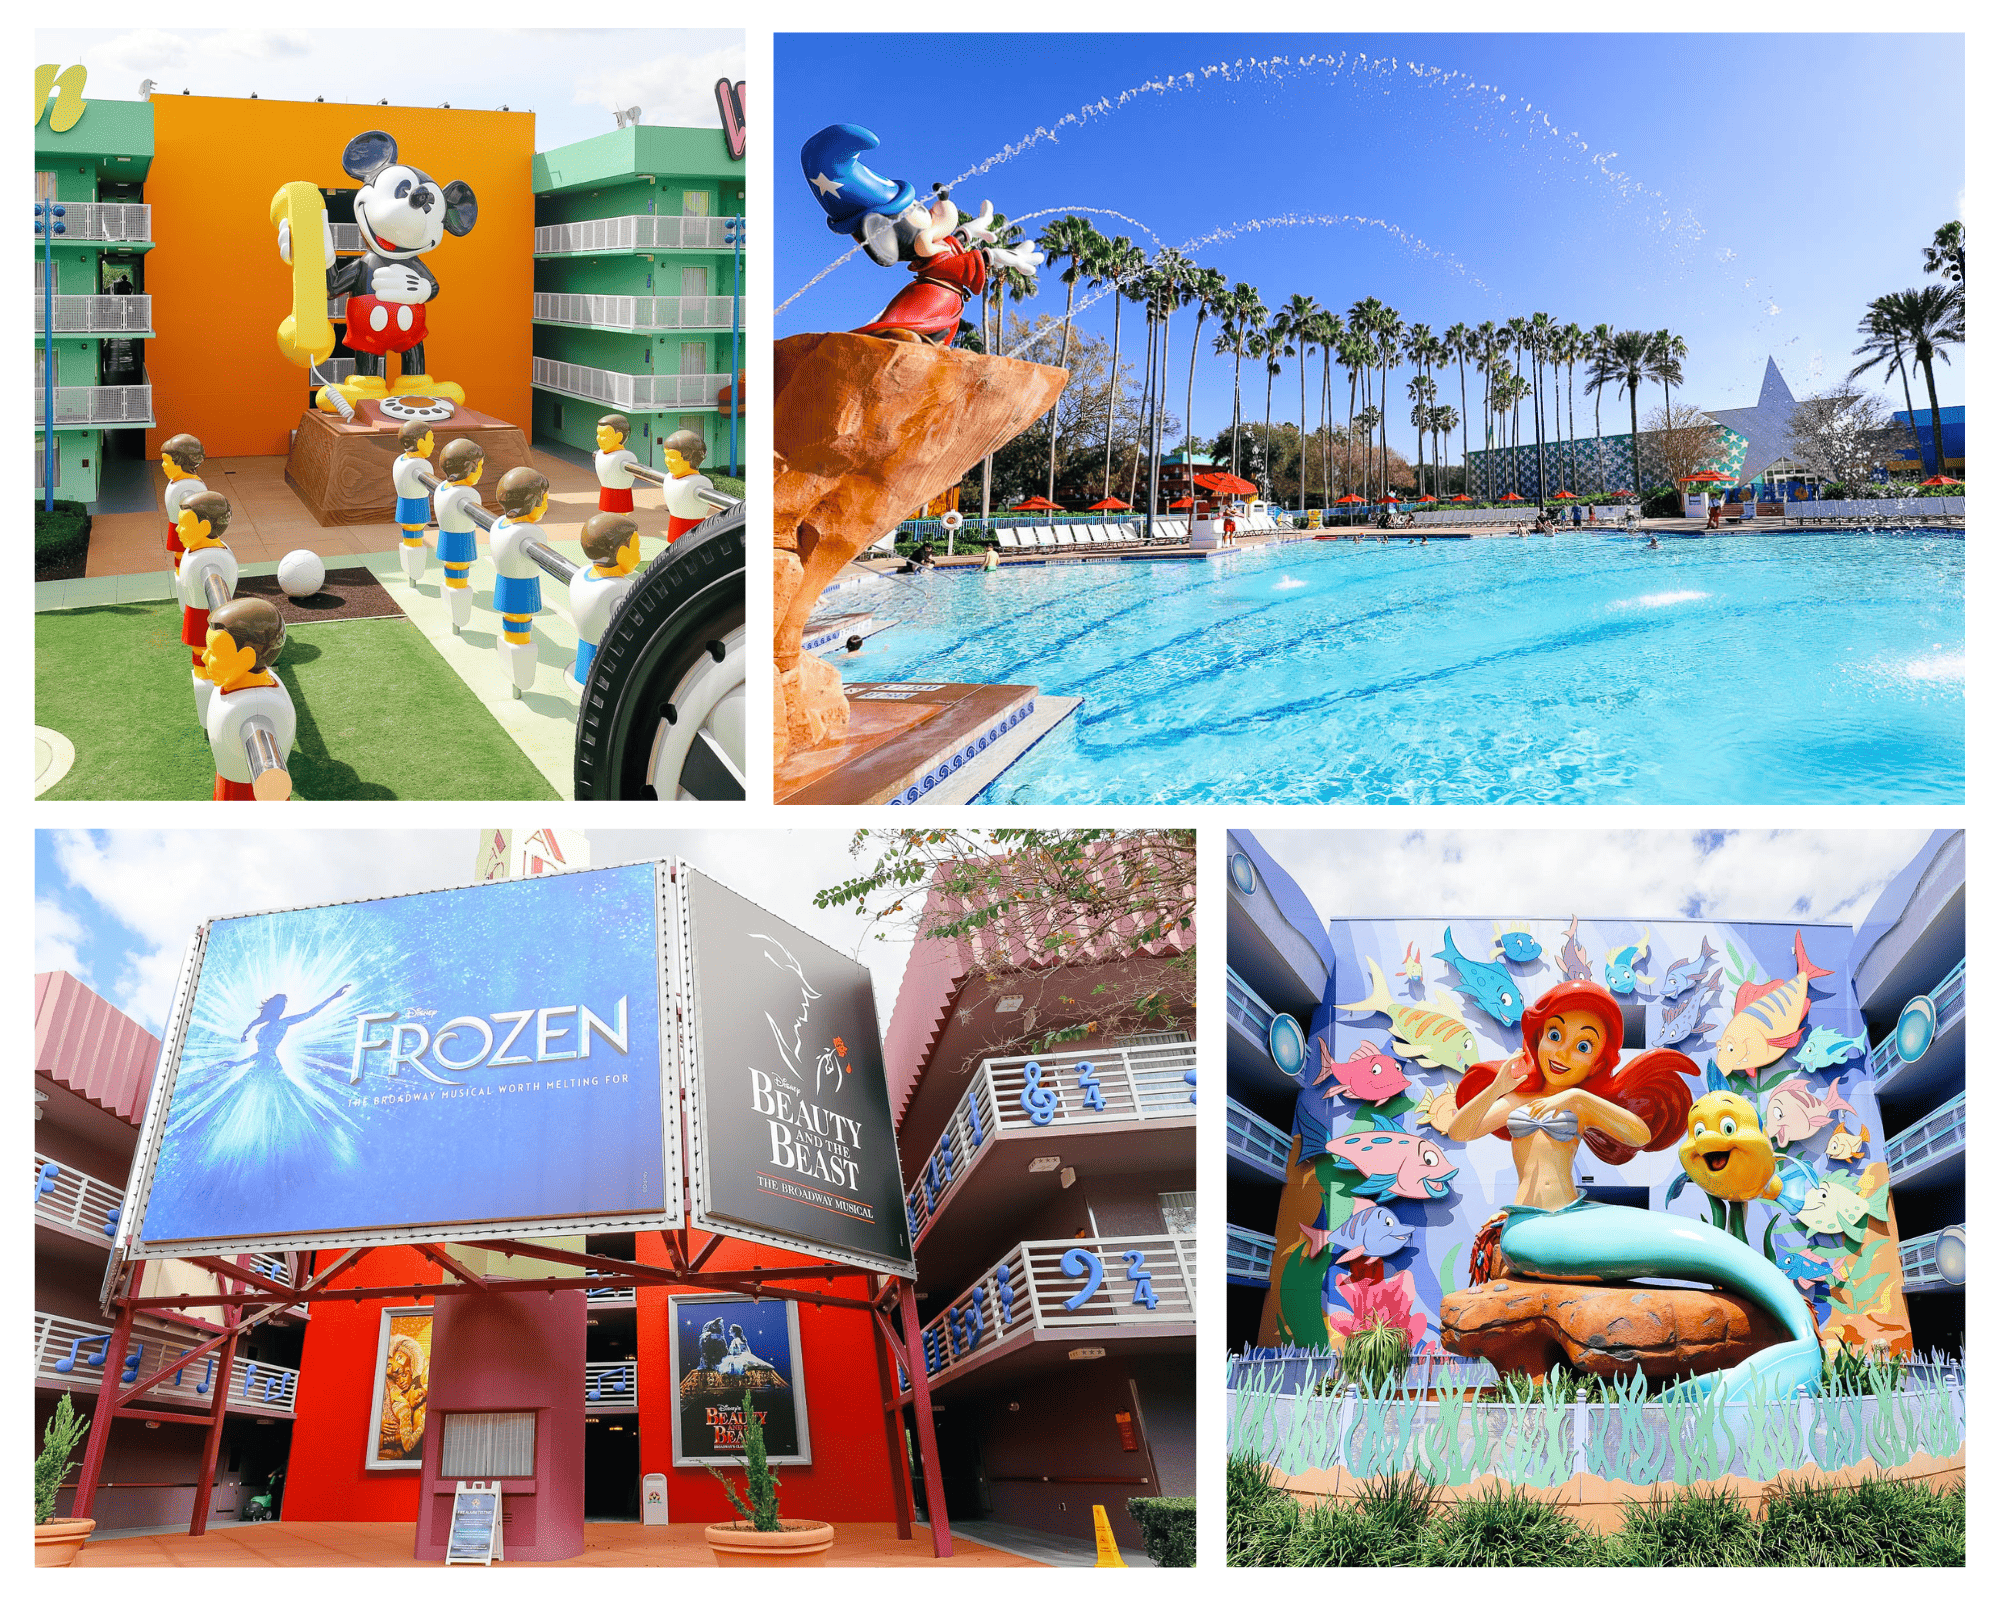 Need Budget-Friendly Accommodations? We’ve Ranked All 5 Disney Value Resorts